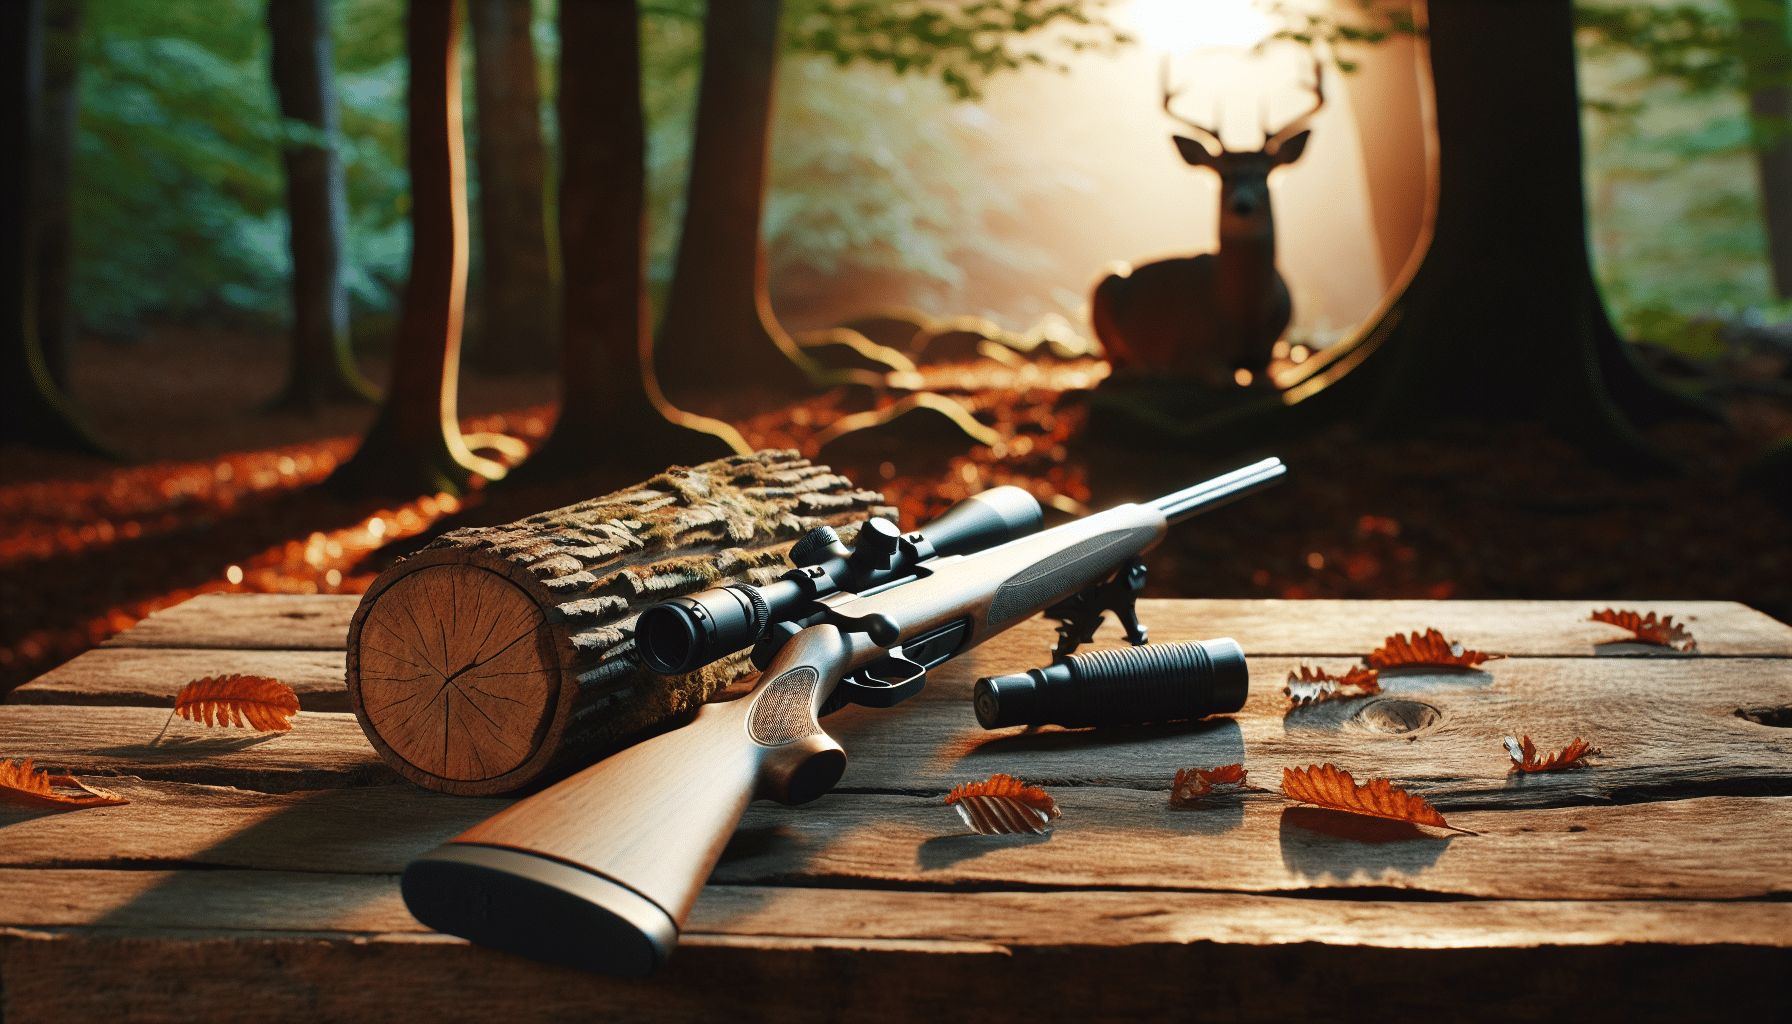 An image showing a beginner-friendly deer hunting scene. The focus is on a rifle resting on a rugged, wooden table in a forest during daytime. There's also a deer silhouette in the distance, half-hidden behind some trees. Leaves are gently falling from the trees surrounding the table. No people, text, brand names or logos are present in the scene.